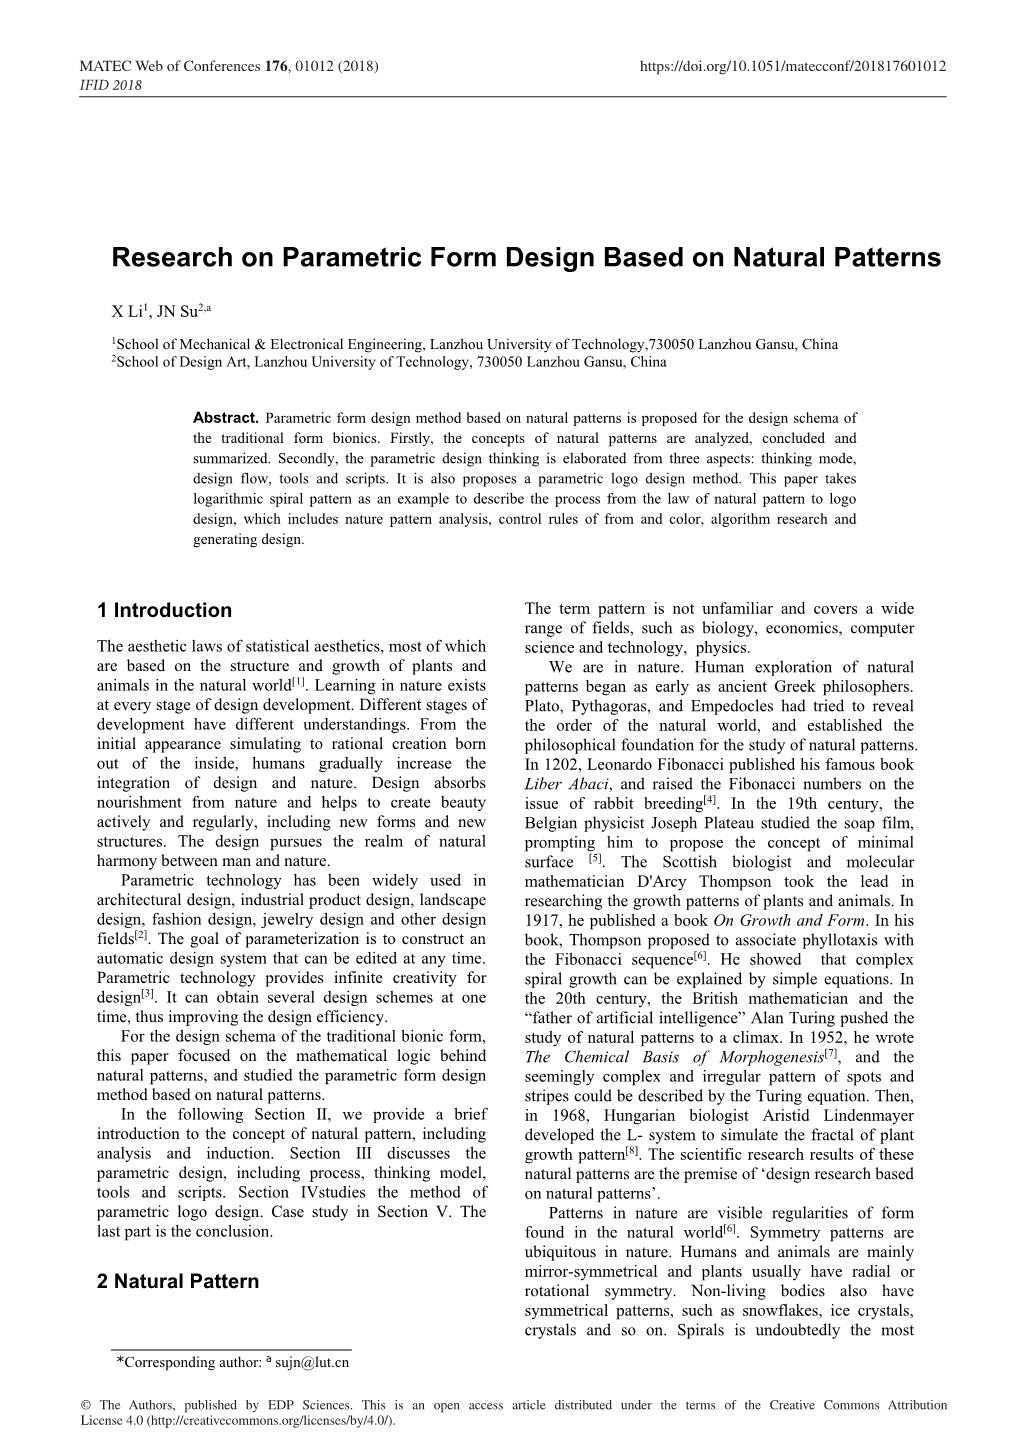 Research on Parametric Form Design Based on Natural Patterns